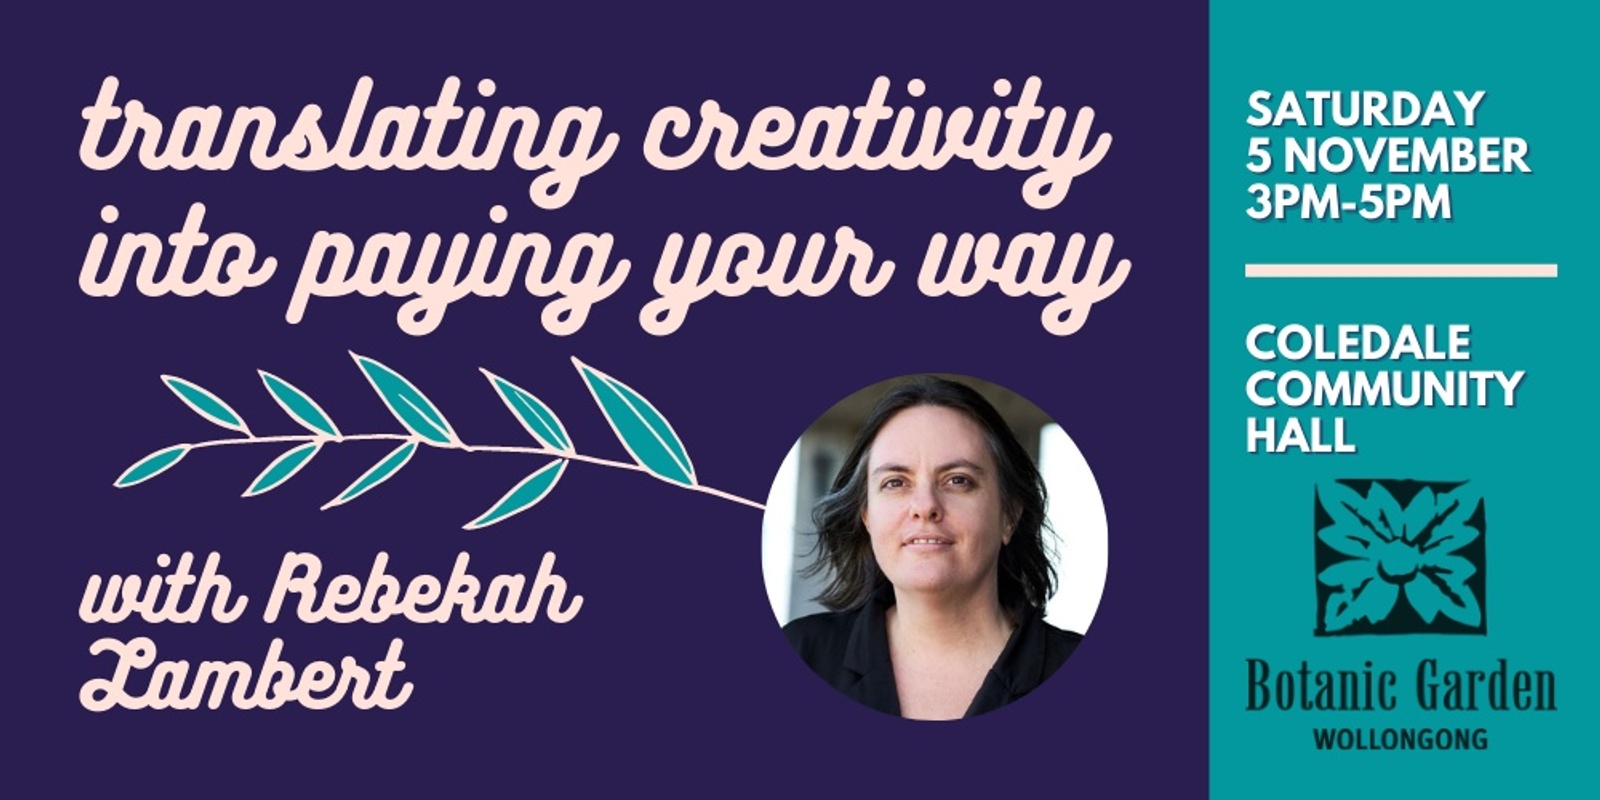 Banner image for Workshop: Translating Creativity Into Paying Your Way  